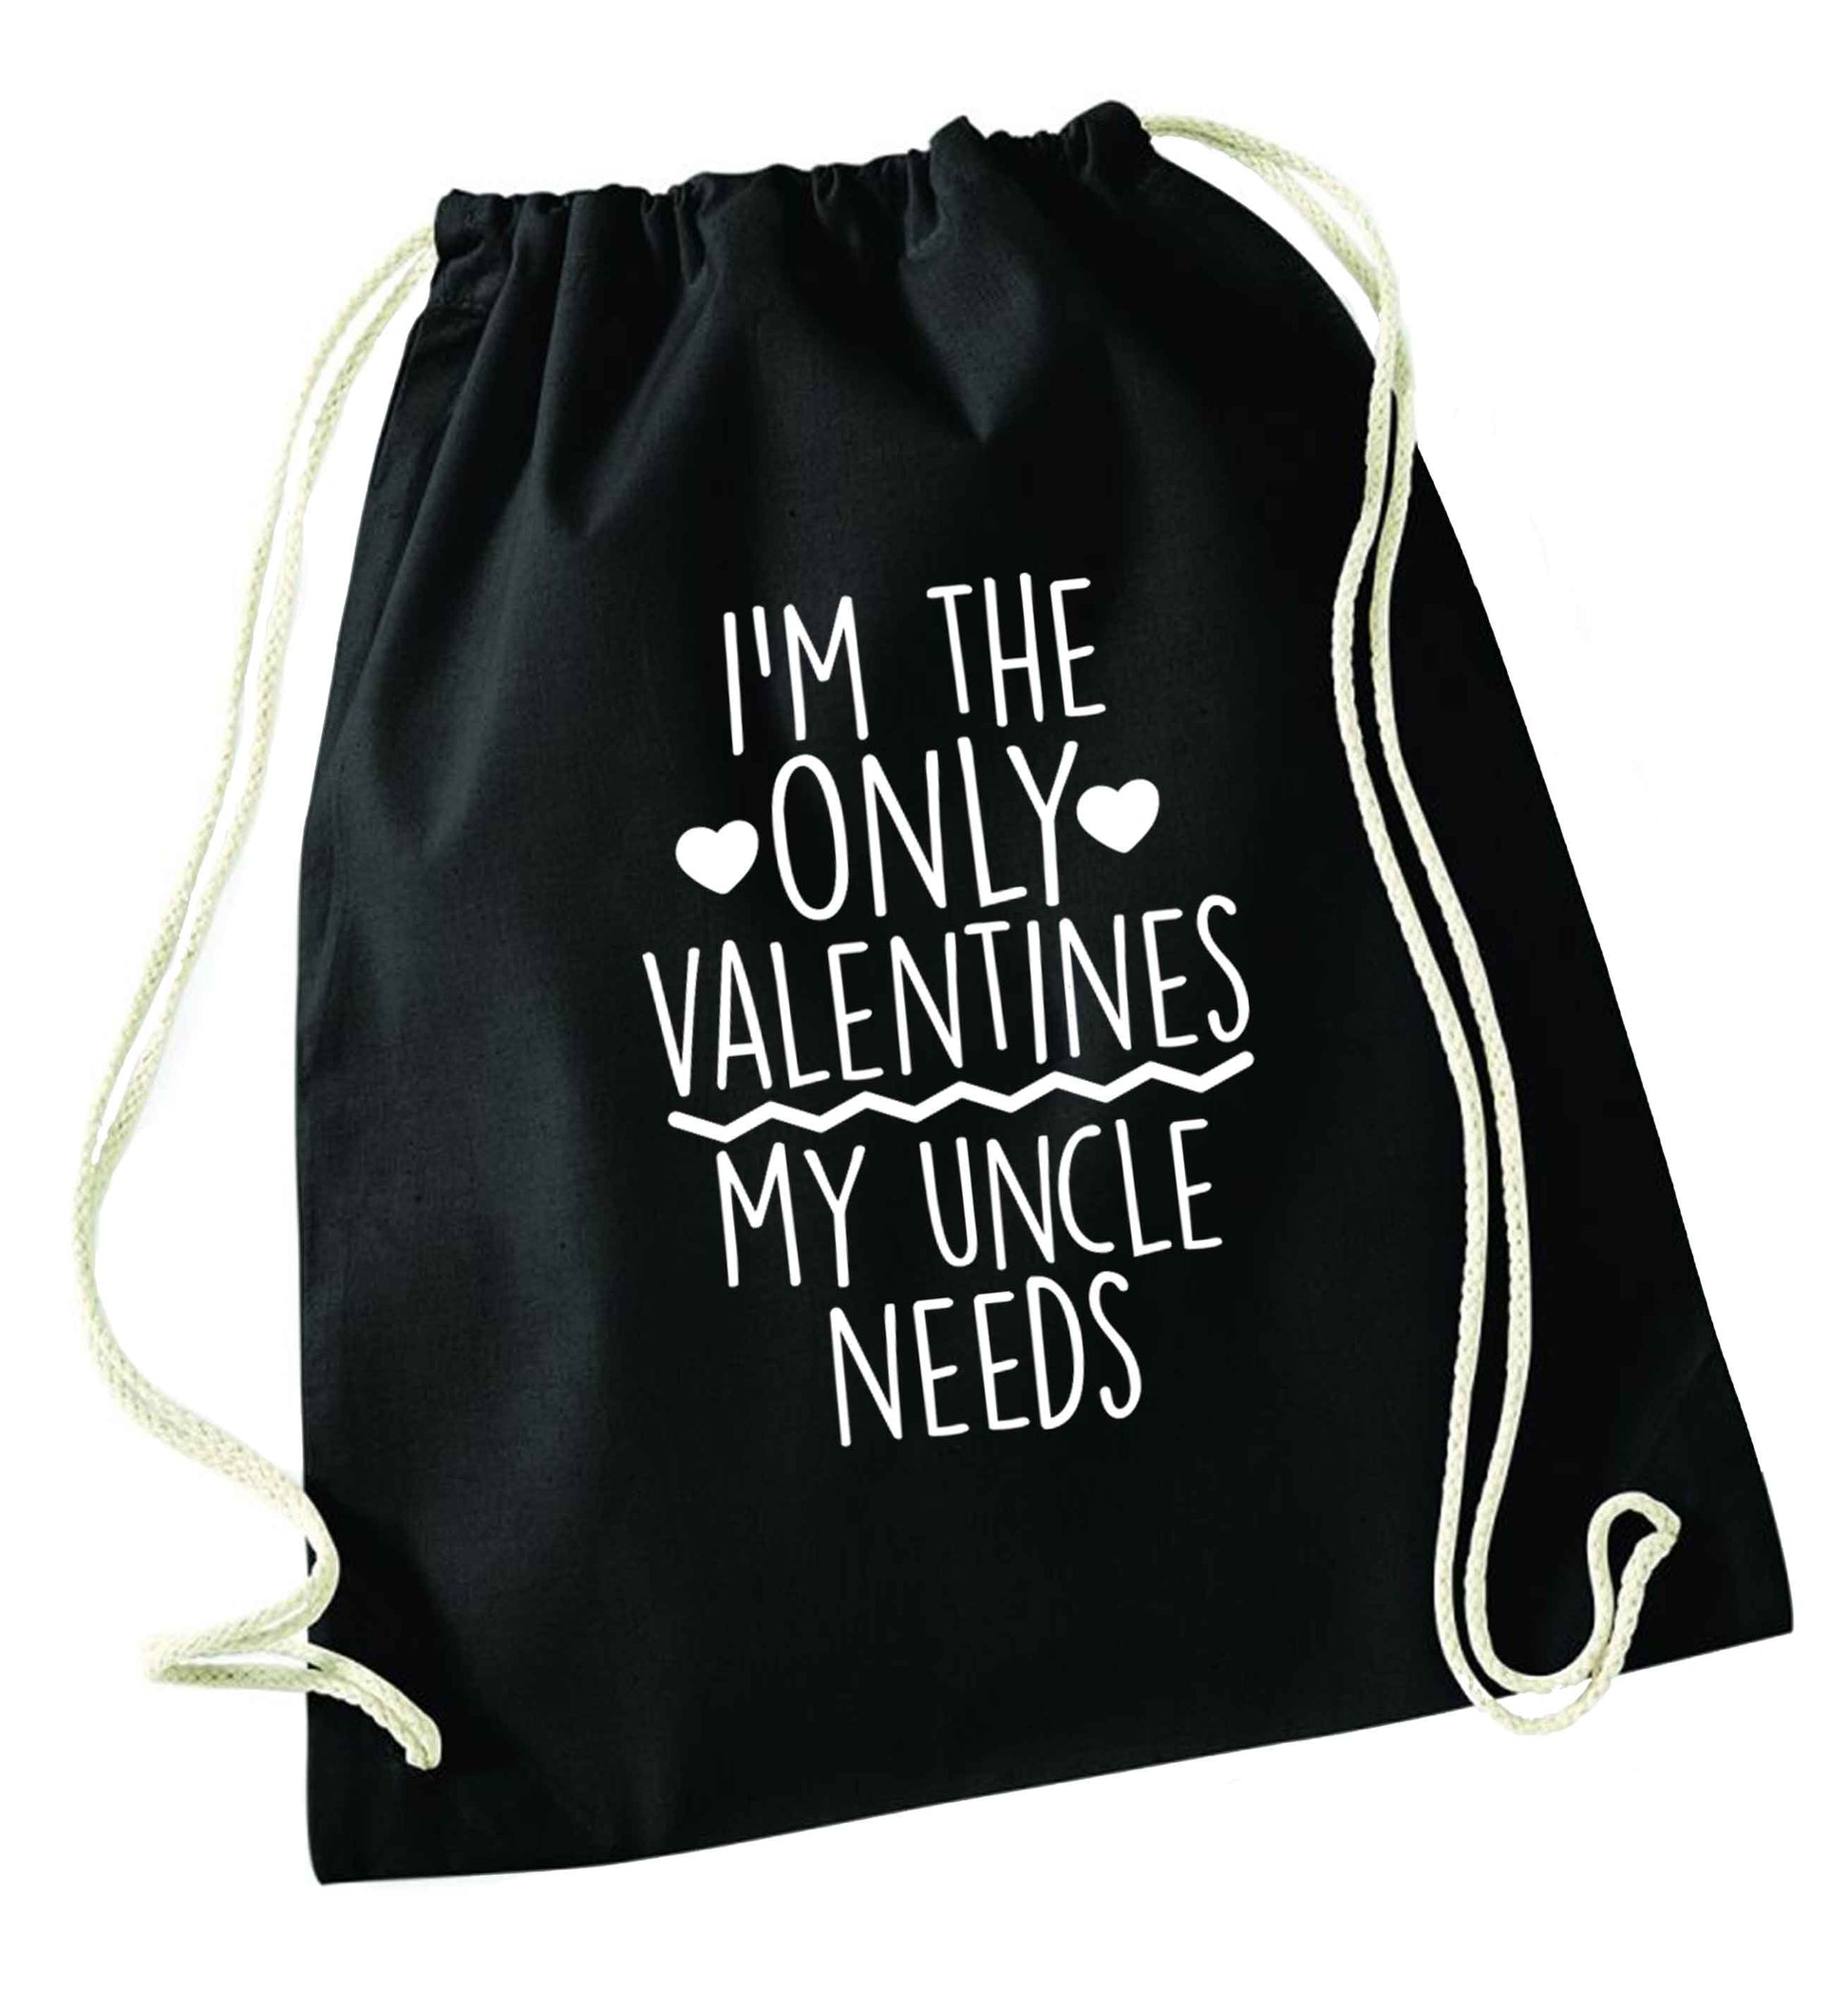 I'm the only valentines my uncle needs black drawstring bag